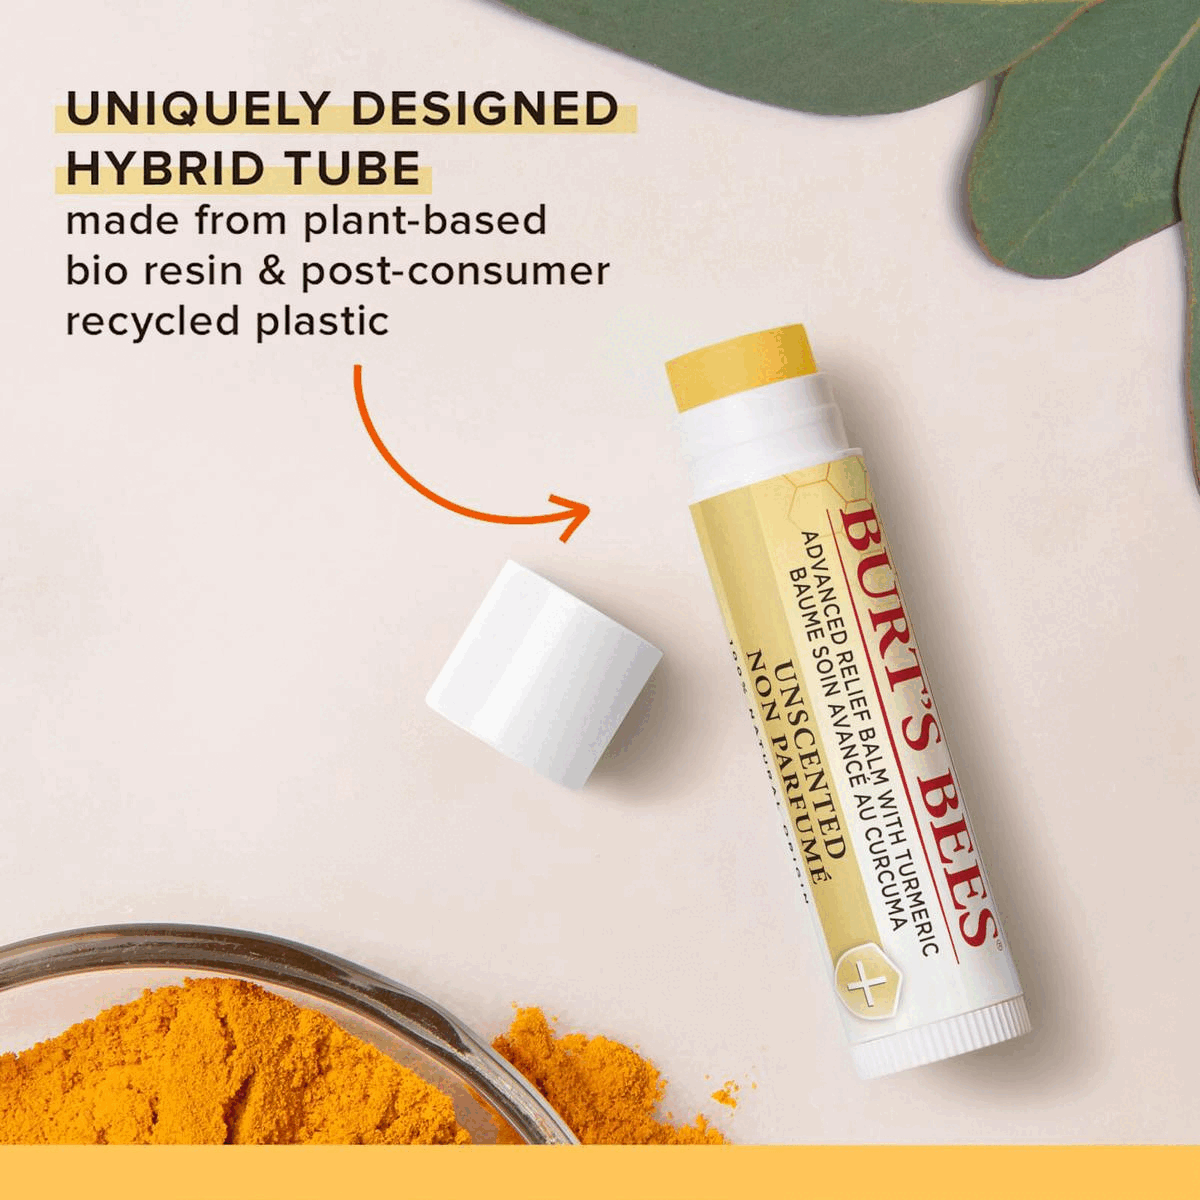 UNIQUELY DESIGNED HYBRID TUBE made from plant-based bio resin & post-consumer recycled plastic, why it works 
            continuous coverage 

            FOR LONGER-LASTING HYDRATION 
            INFUSED WITH ANTIOXIDANT-RICH TURMERIC,
            BEFORE 

            AFTER 
            Day 1 
            Results will vary 
            Day 14,  
            for soft, smooth lips,
            KIND TO SKIN & PLANET SINCE 1984 
            Ingredients From Nature 
            Leaping Bunny Certified 
            Landfill-free Operations 
            oiA 
            Responsible Sourcing 
            Recyclable Packaging 
            c.,401p,00 CAPRI CarbonNeutral® NEUTRAL® Certified c°,71 p a<\'i 